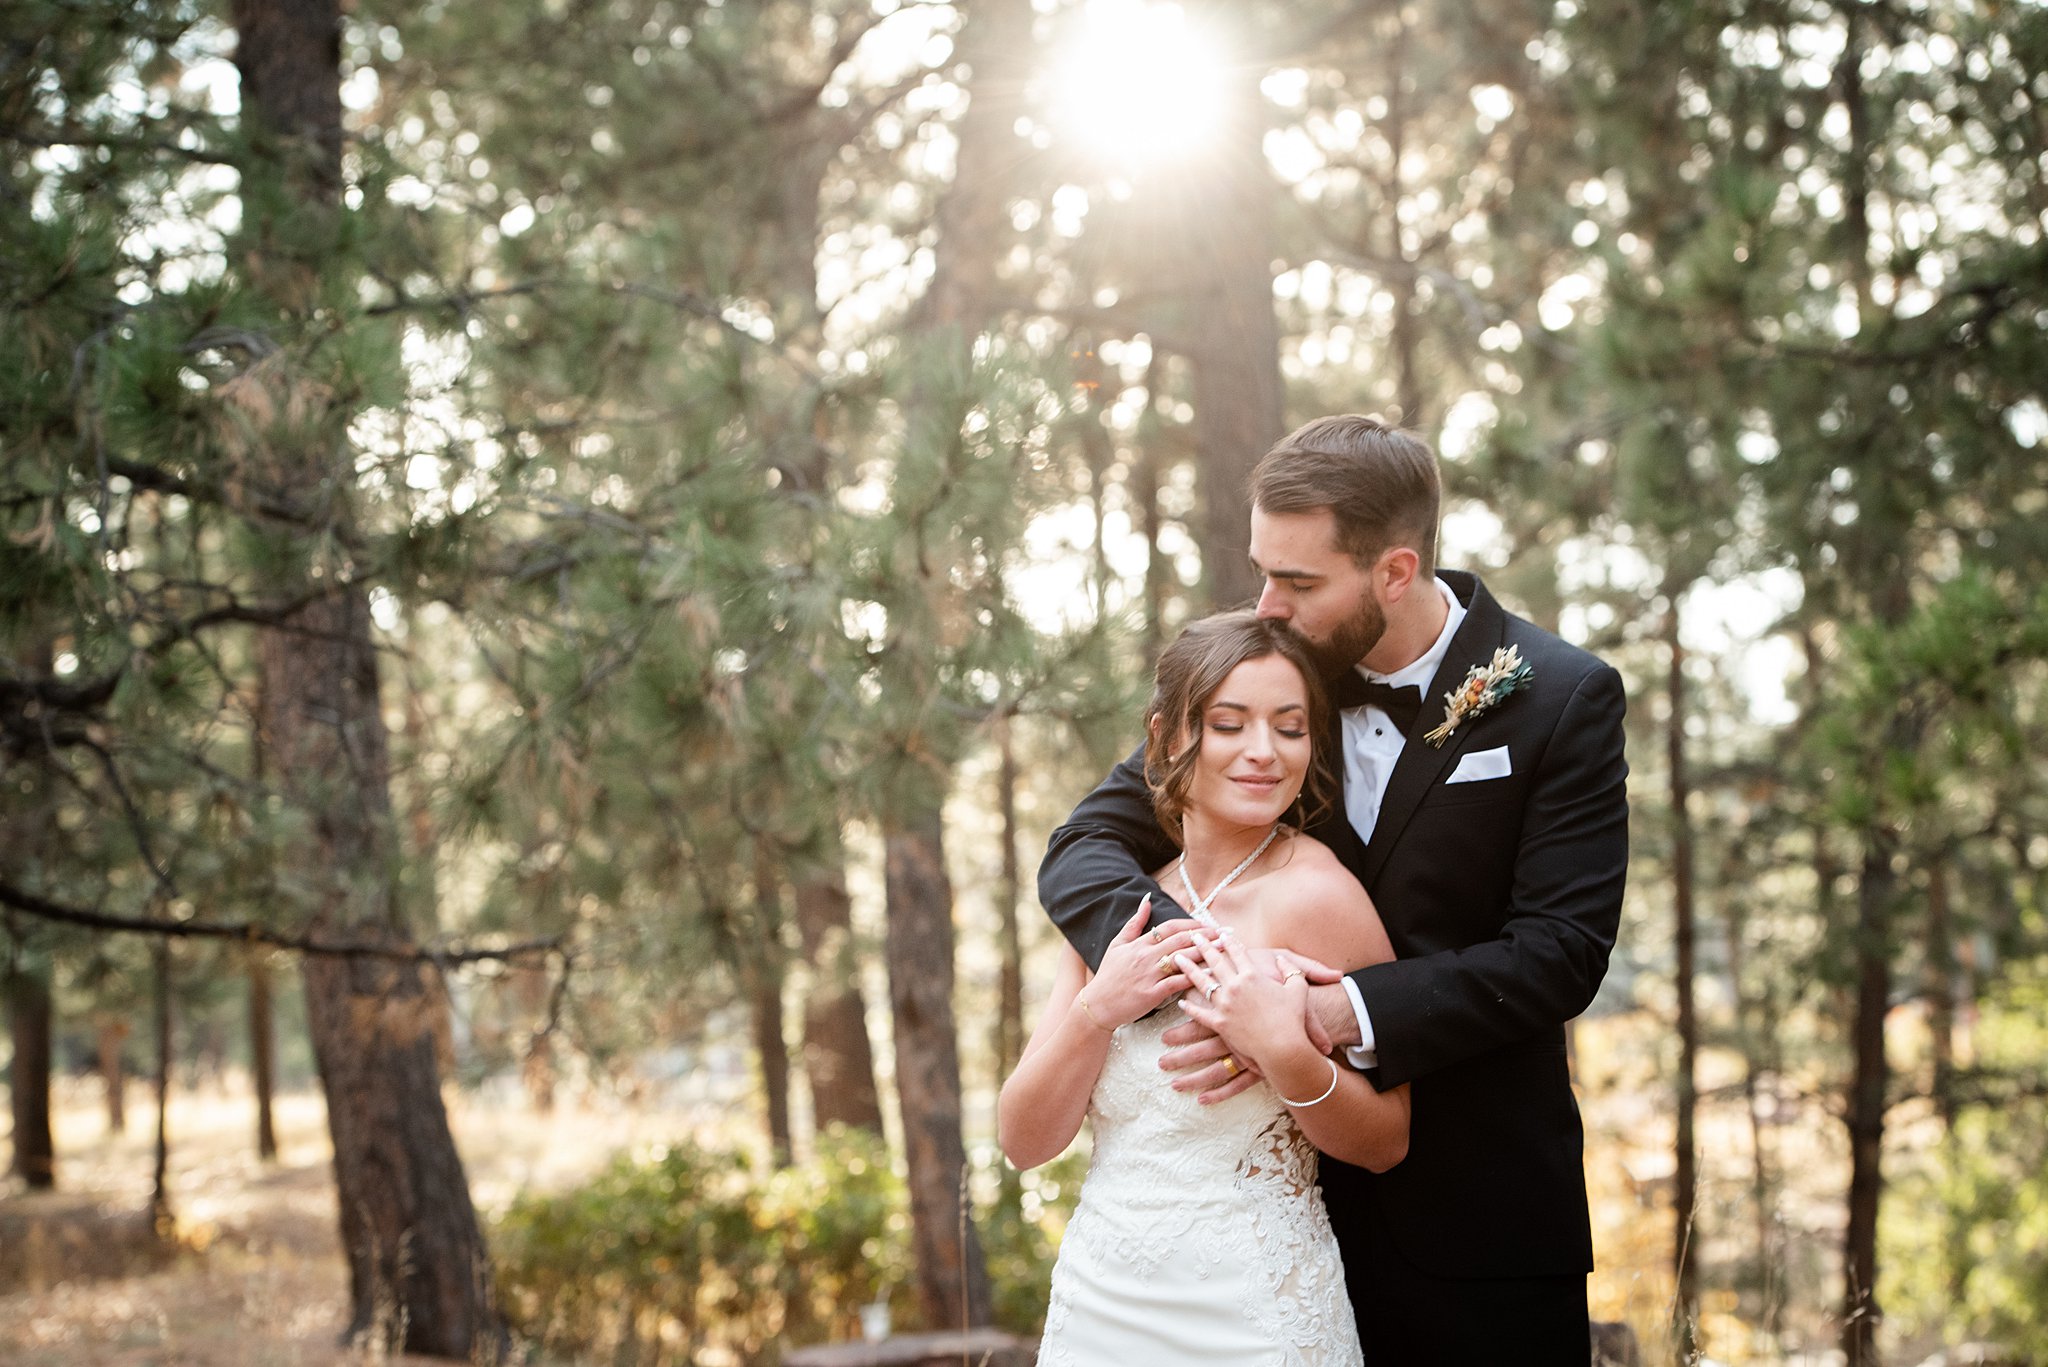 Newlyweds embrace and kiss while standing in a forest at sunset at their black forest wedding venue